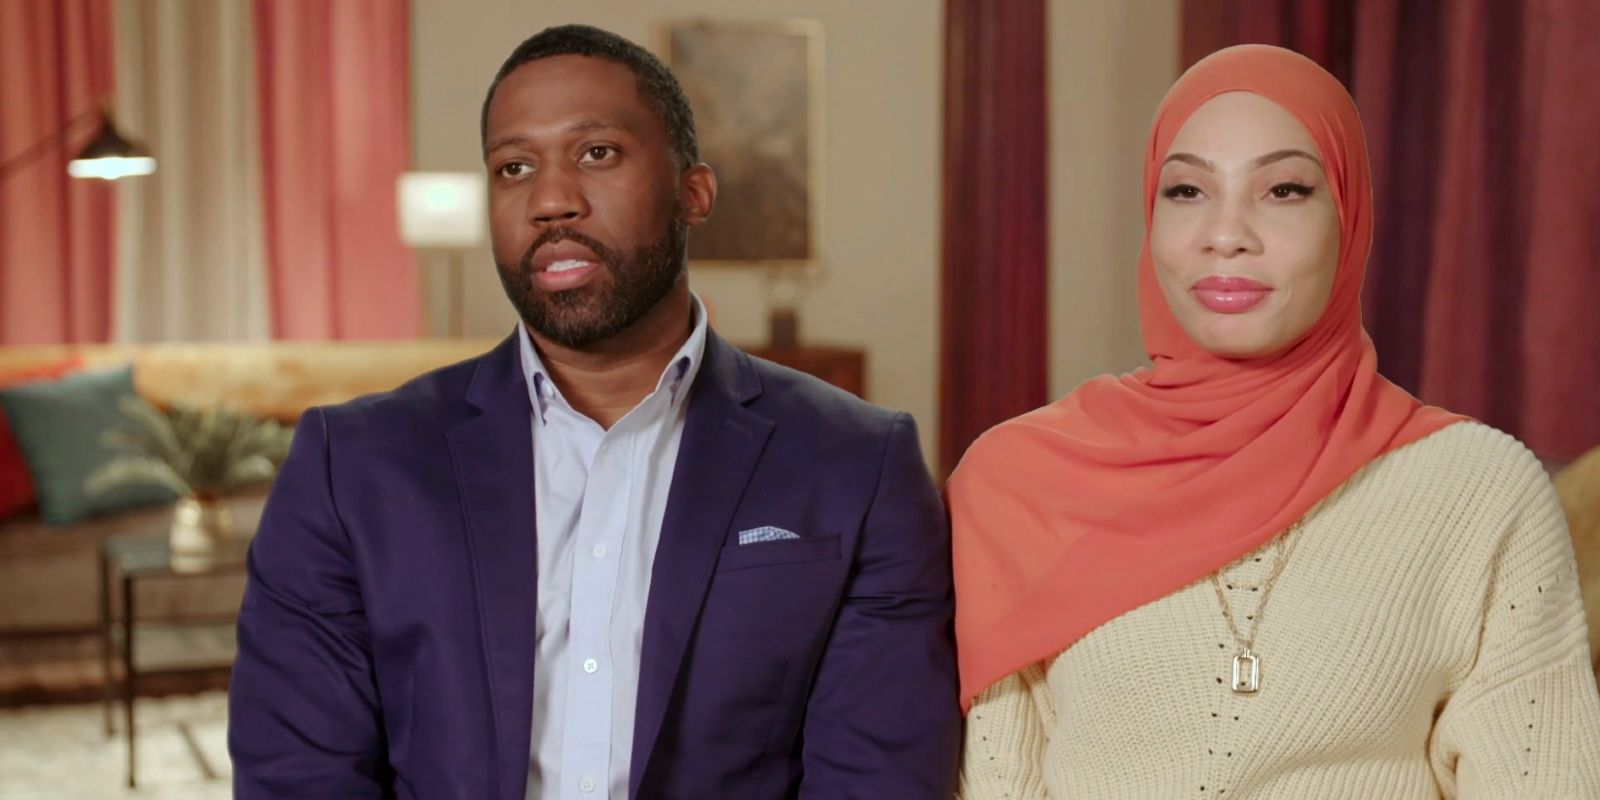 Bilal and Shaeeda talking to the camera in 90 Day Fiancé.